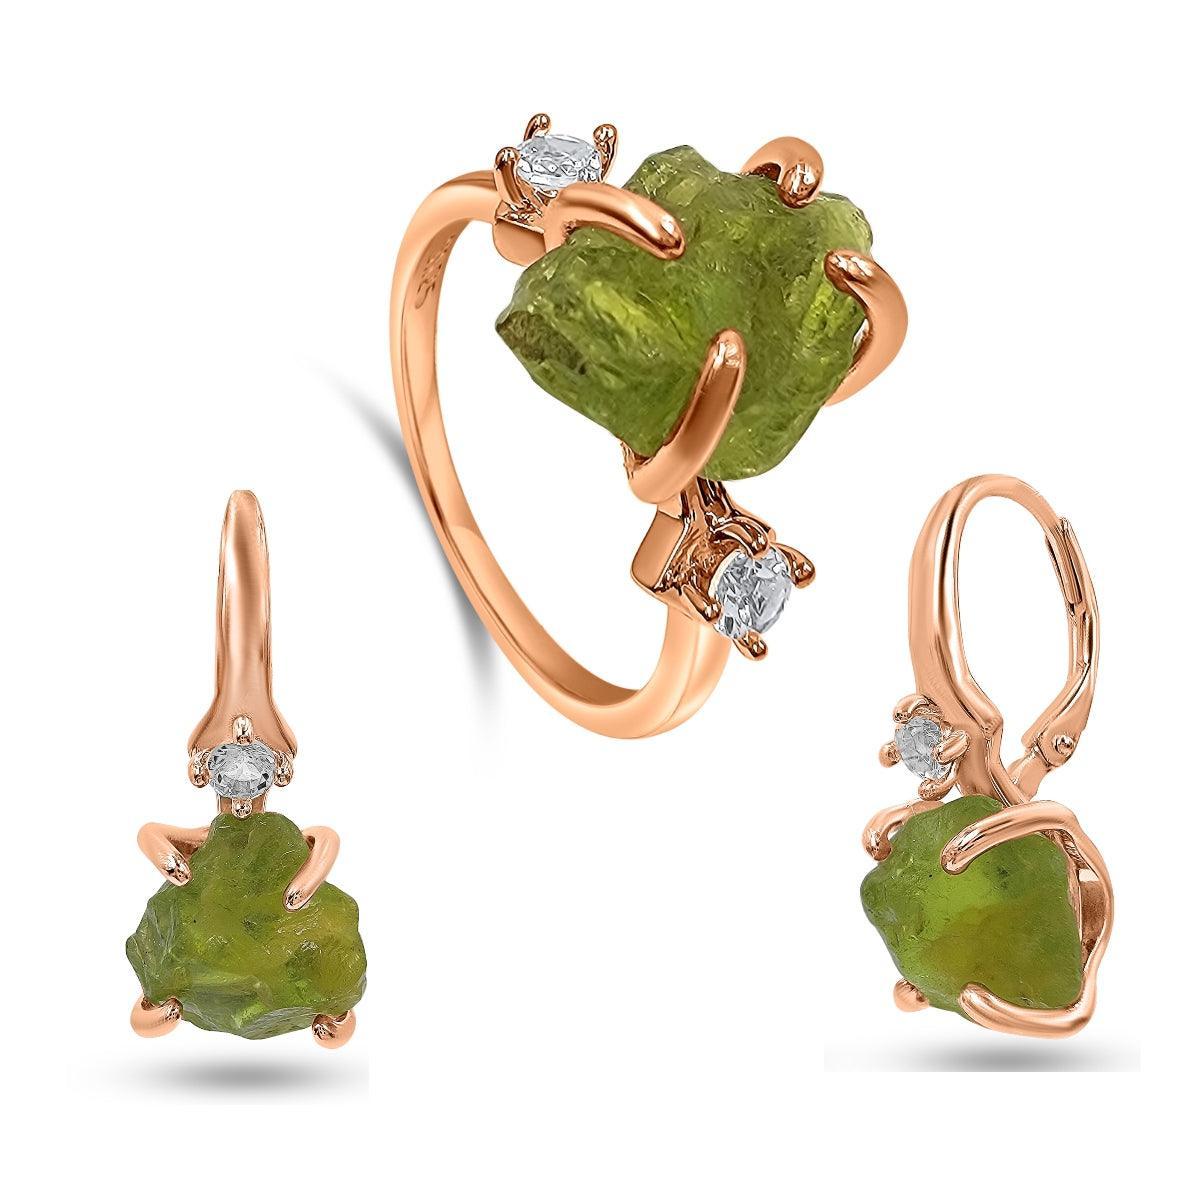 Buy PEARL's Earrings Collection with Peridot | GLAMIRA.co.uk